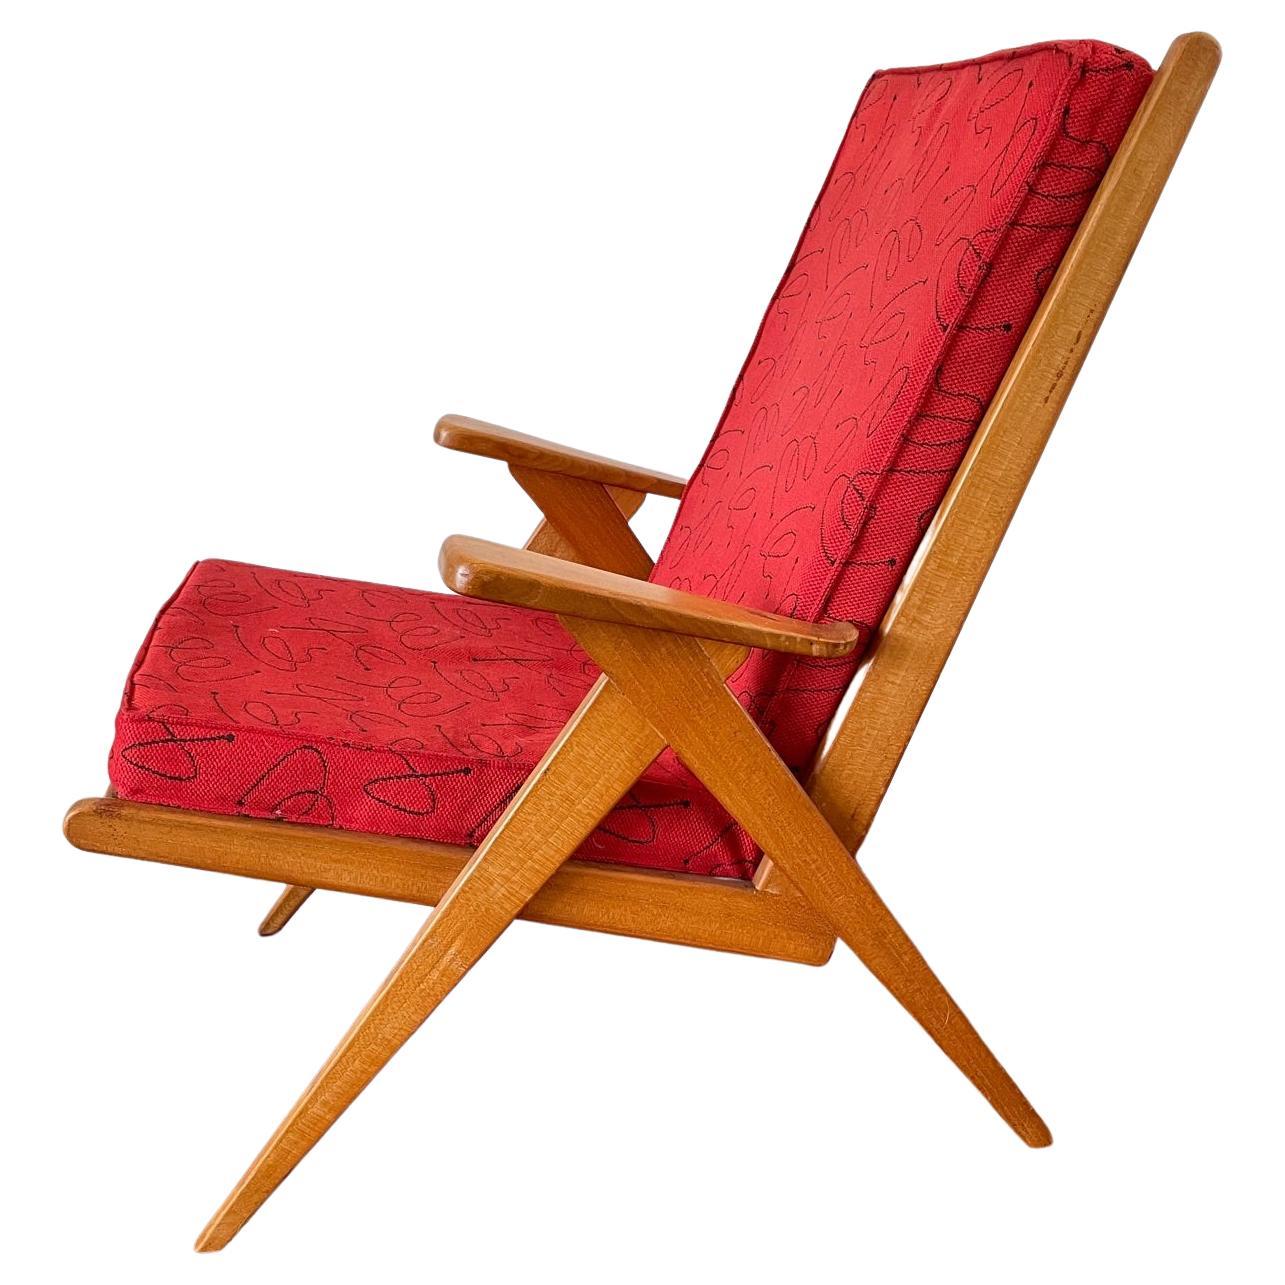 Vintage Red Danish Design Chair, Mid Century Wooden Chair, Original Fabric, 60's For Sale